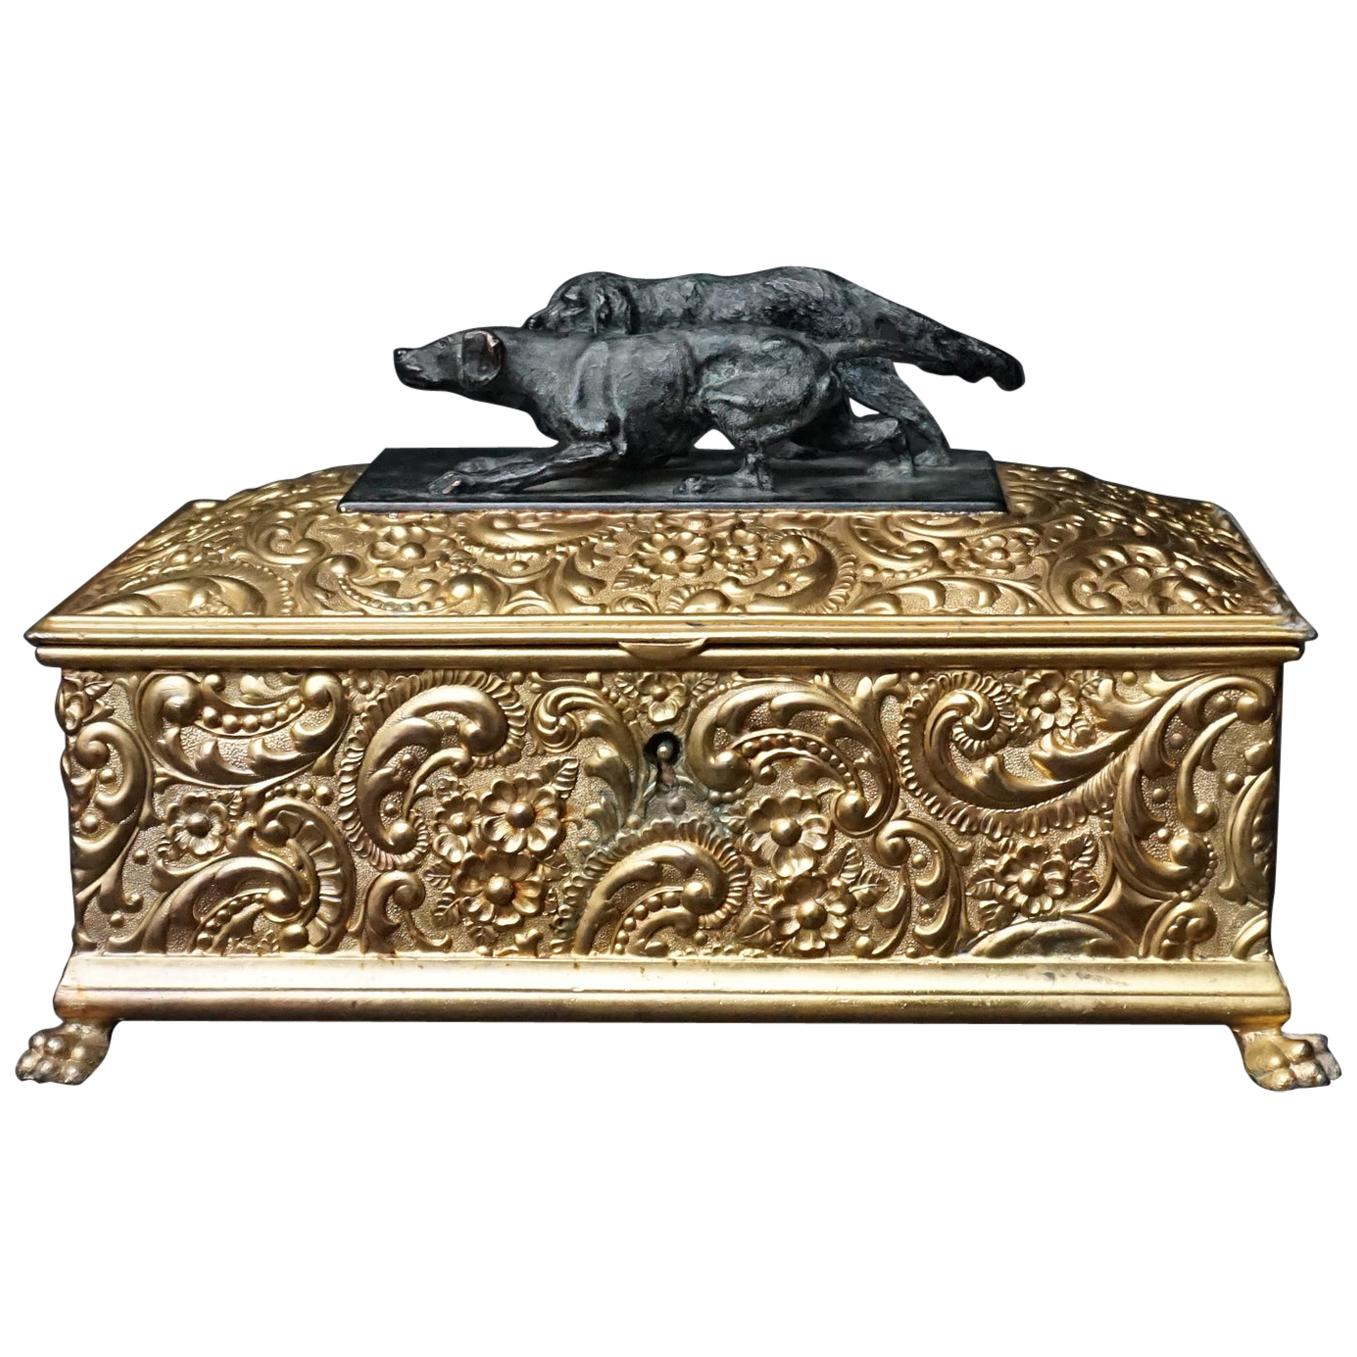 19th Century Meriden Wilcox Gilt Silver Plate Humidor with Bronze Hunting Dogs